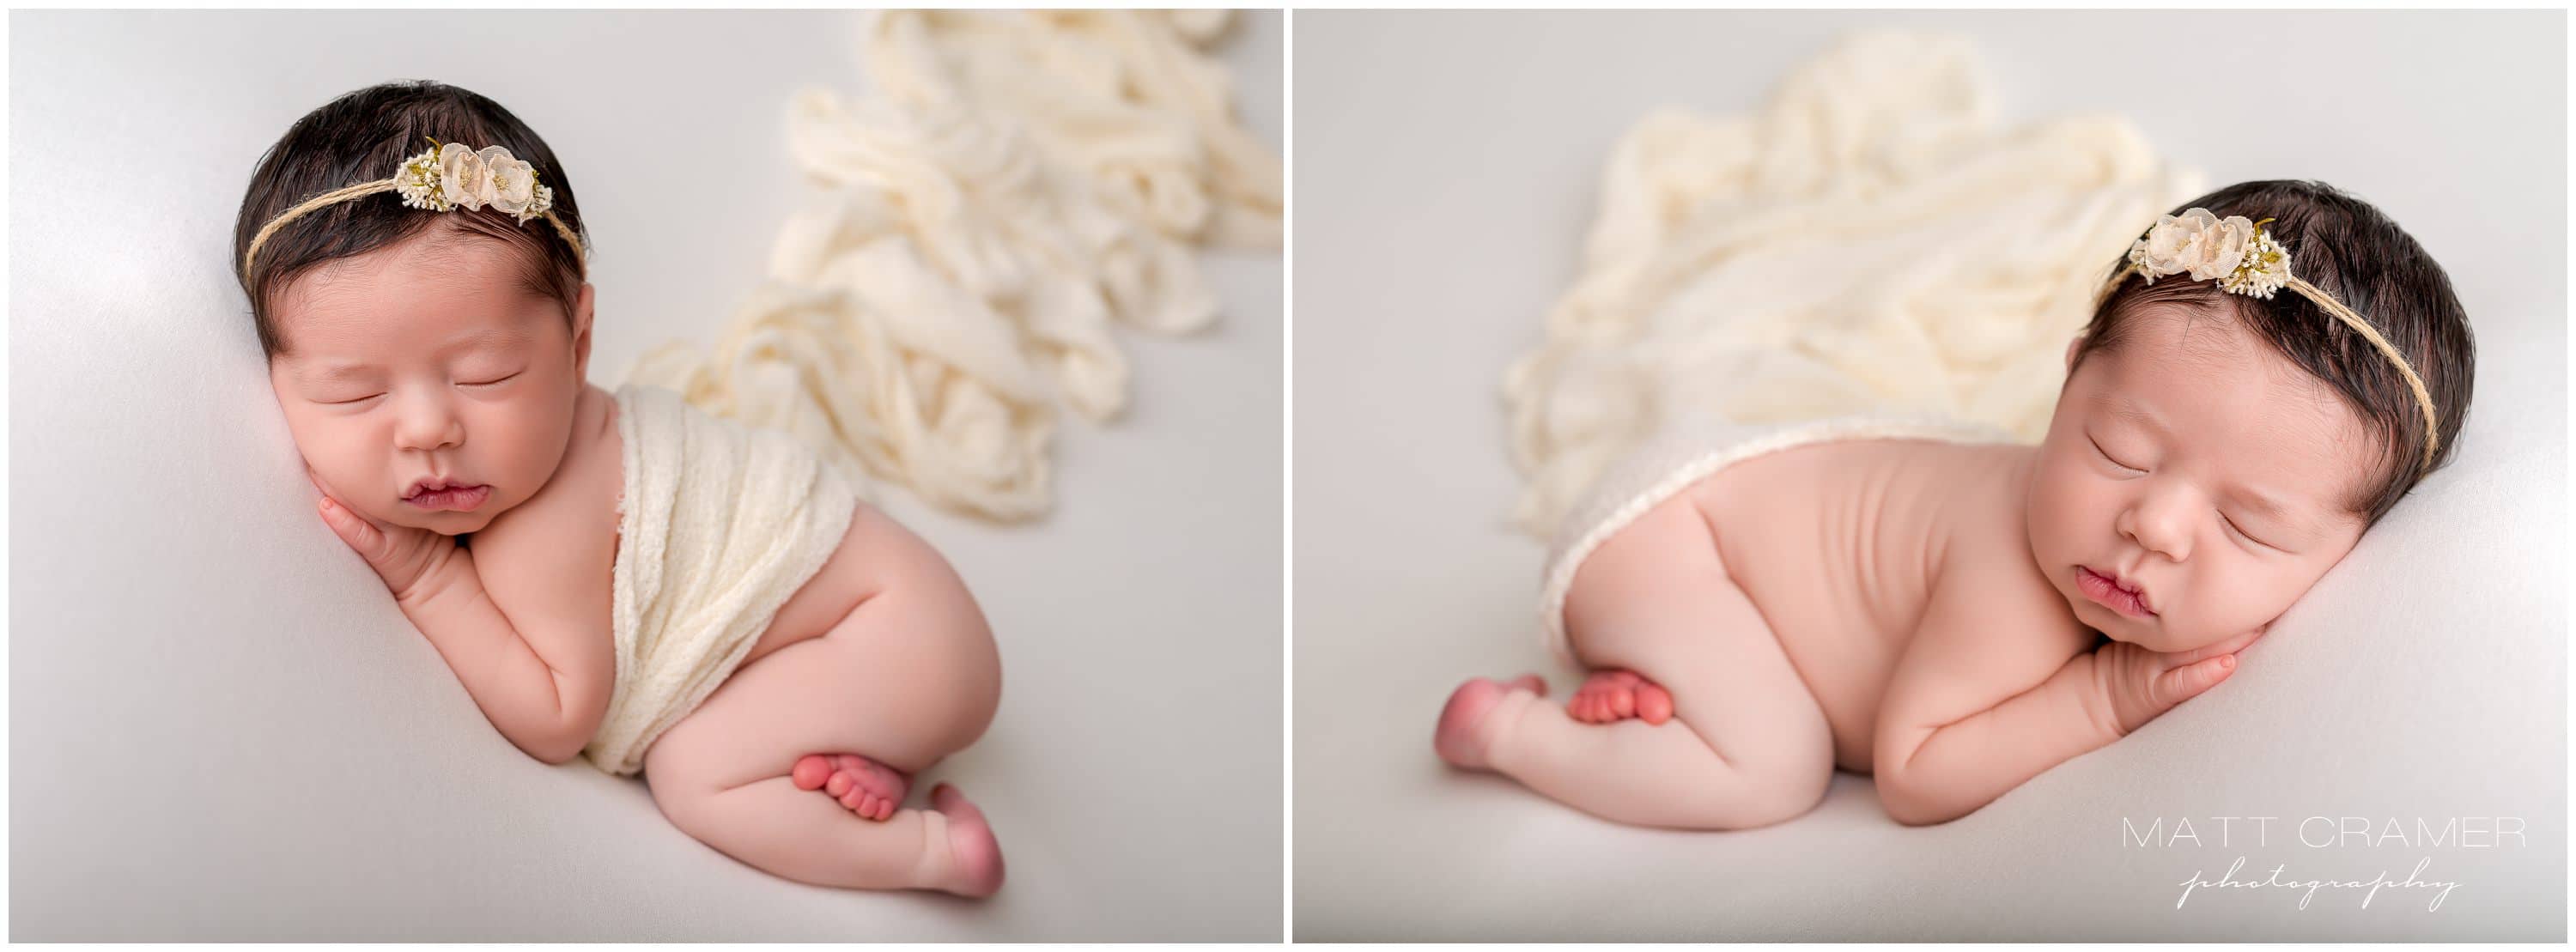 two pictures of newborn baby girl posed on fabric